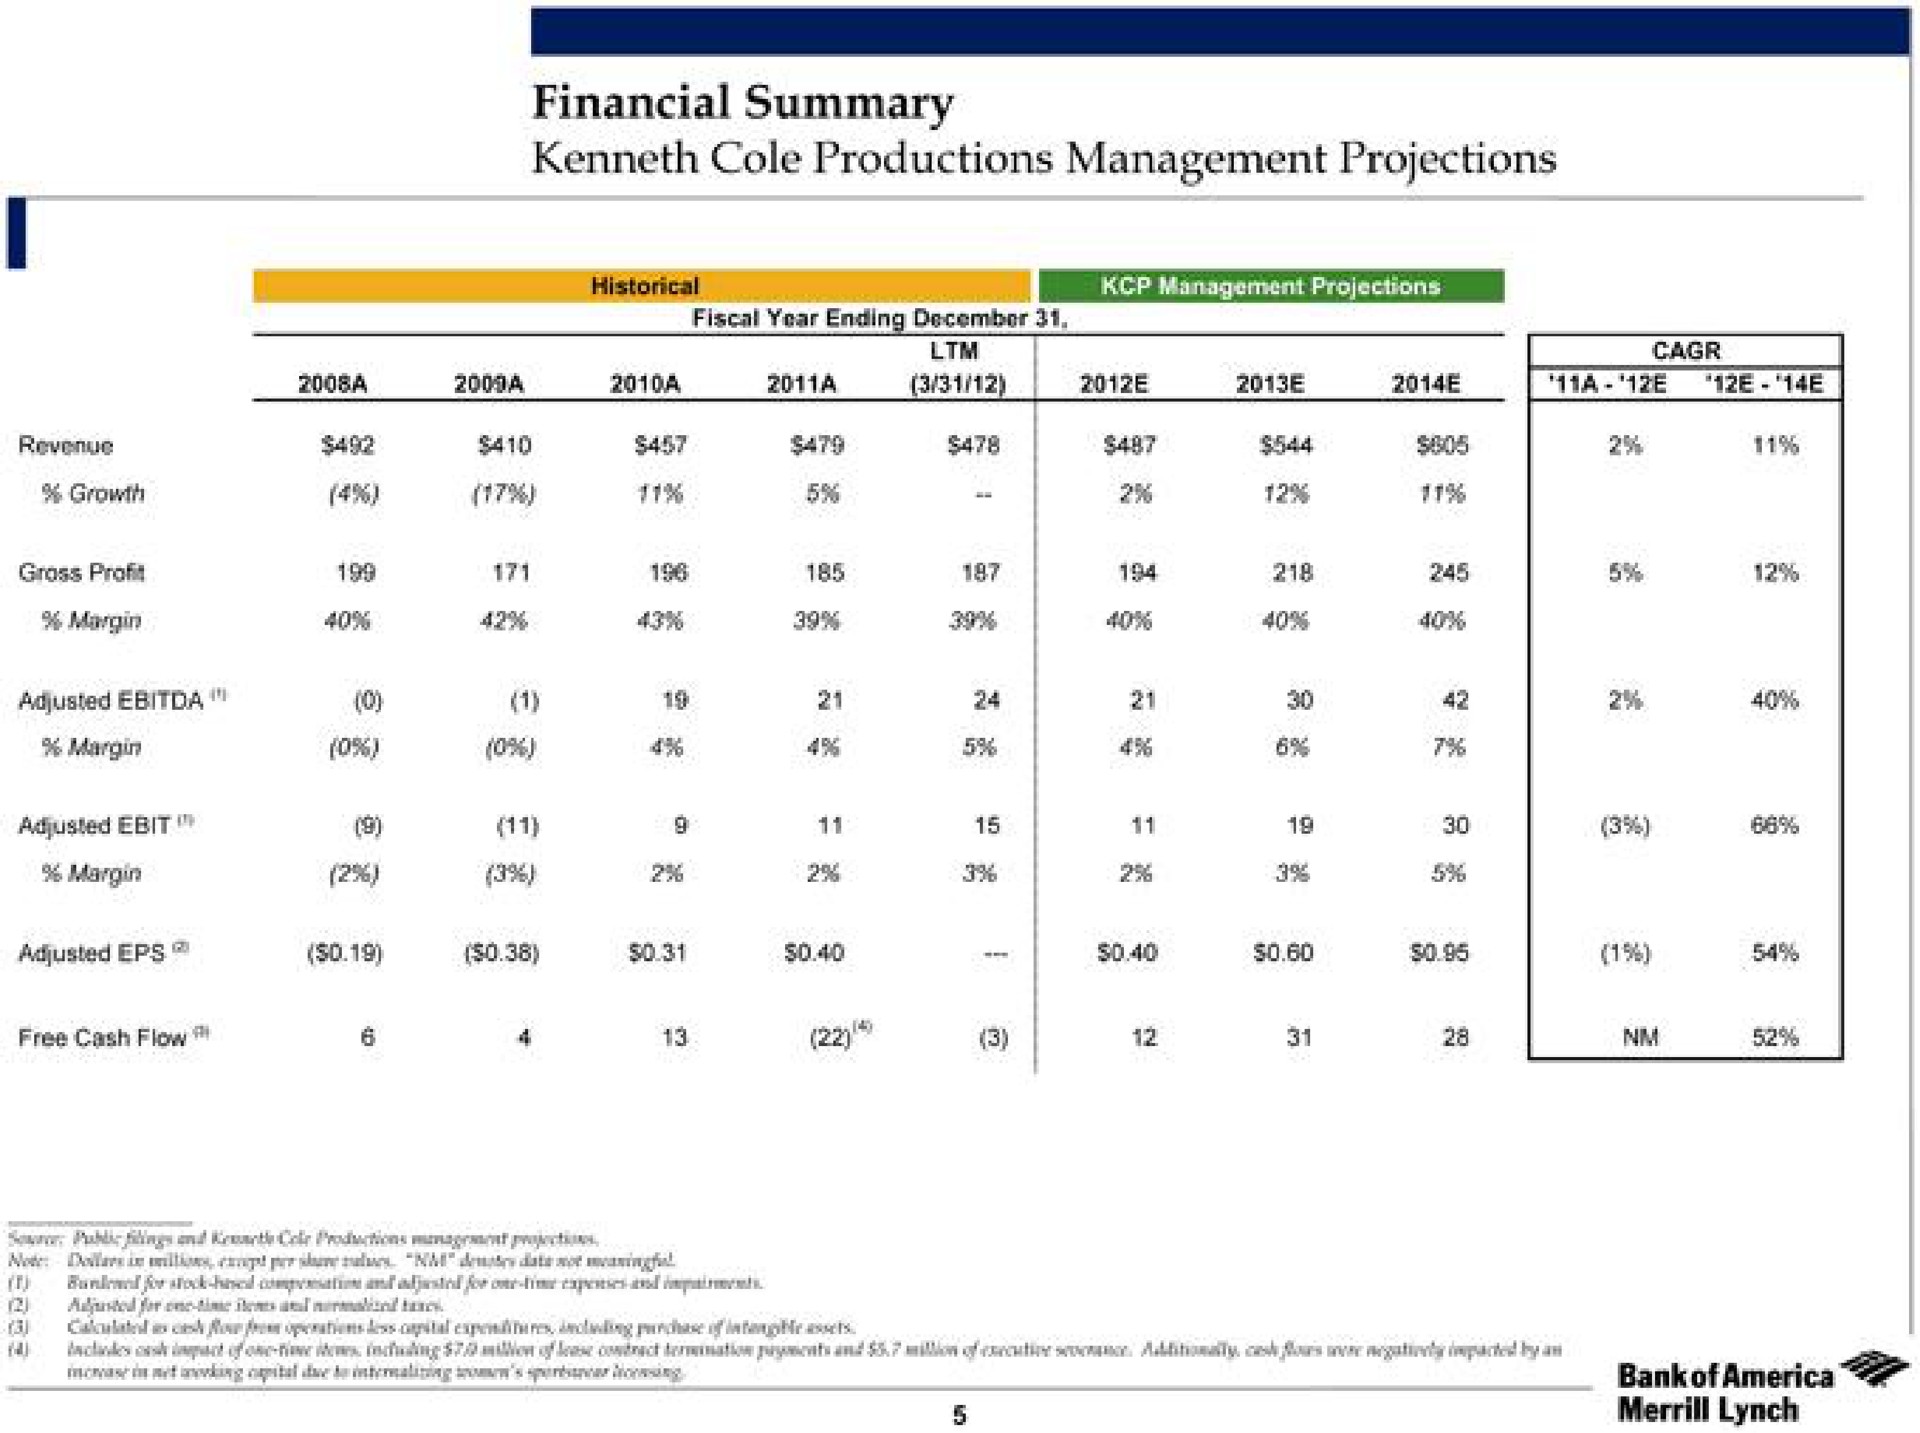 financial summary cole productions management projections | Bank of America